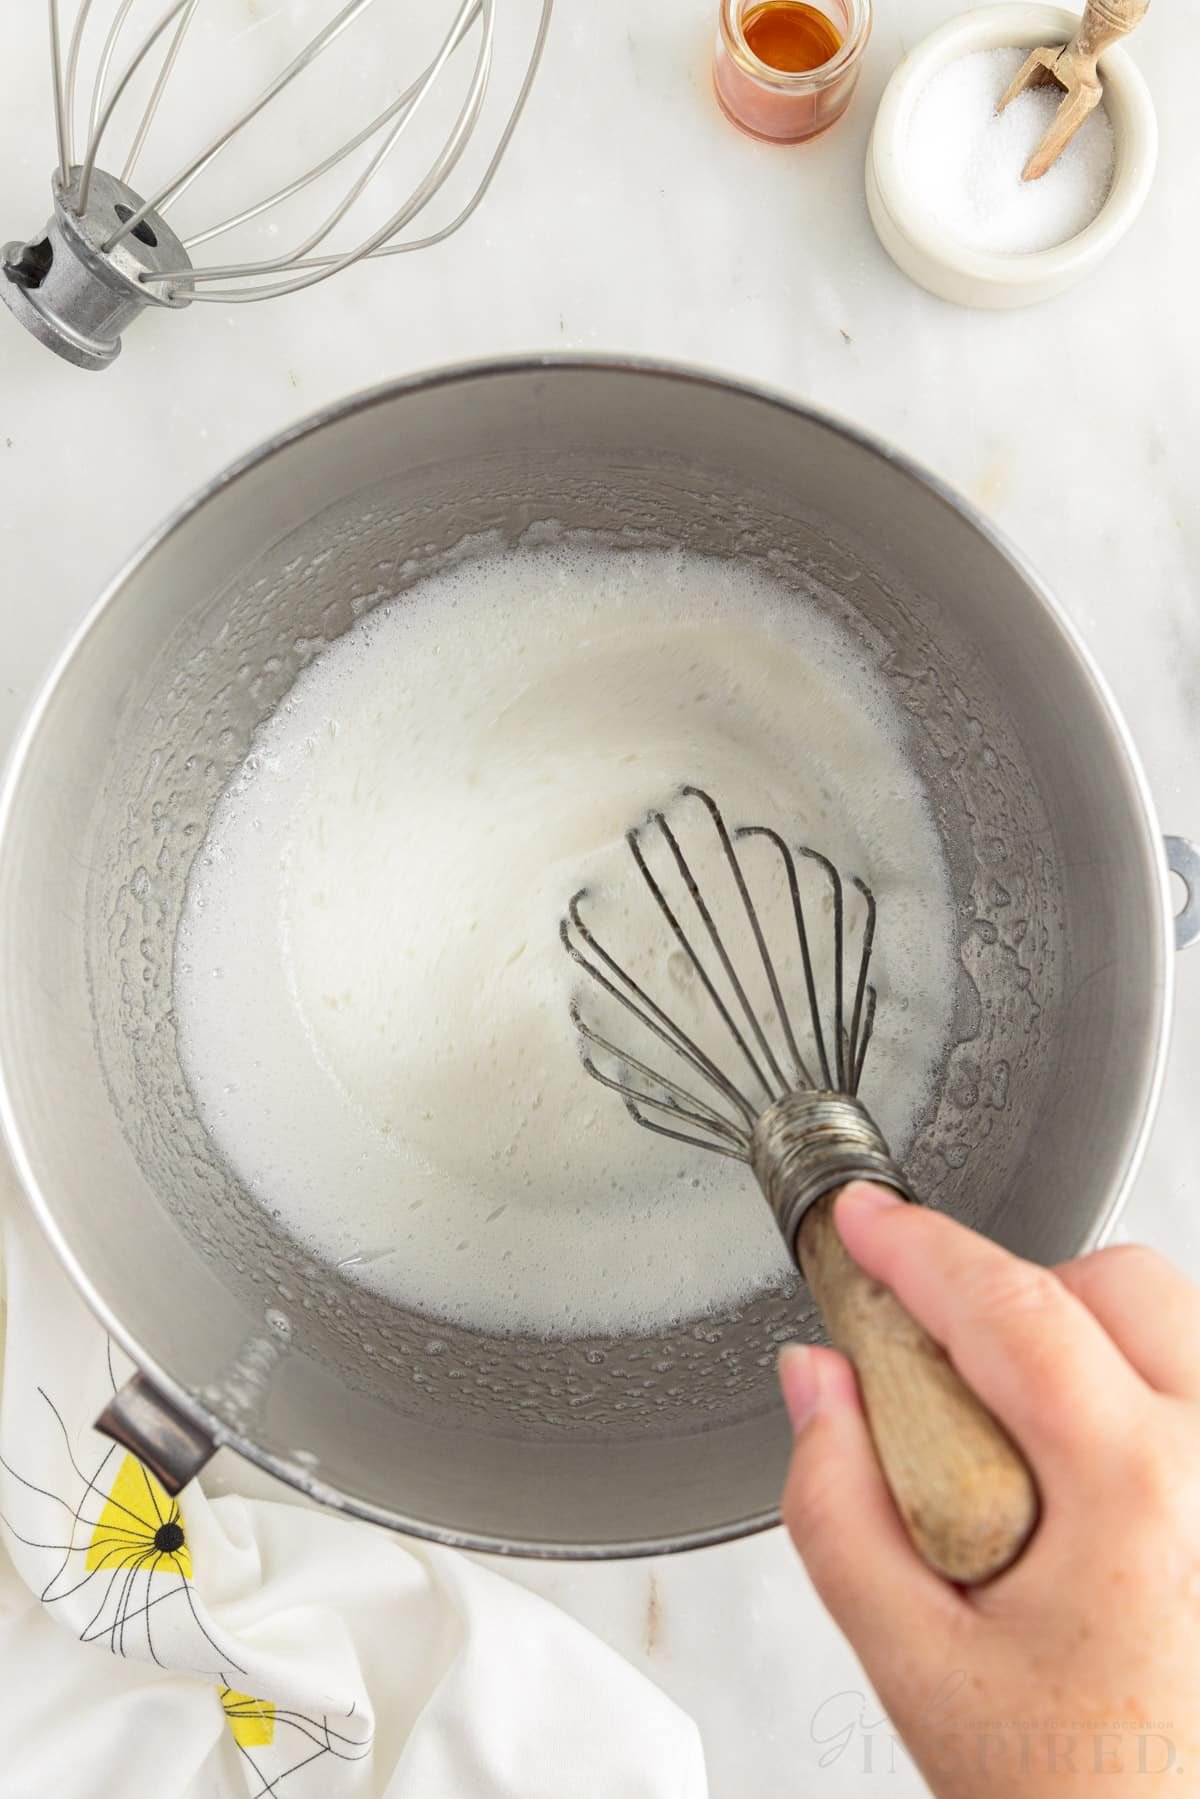 egg mixture after it has been beaten with a whisk stirring